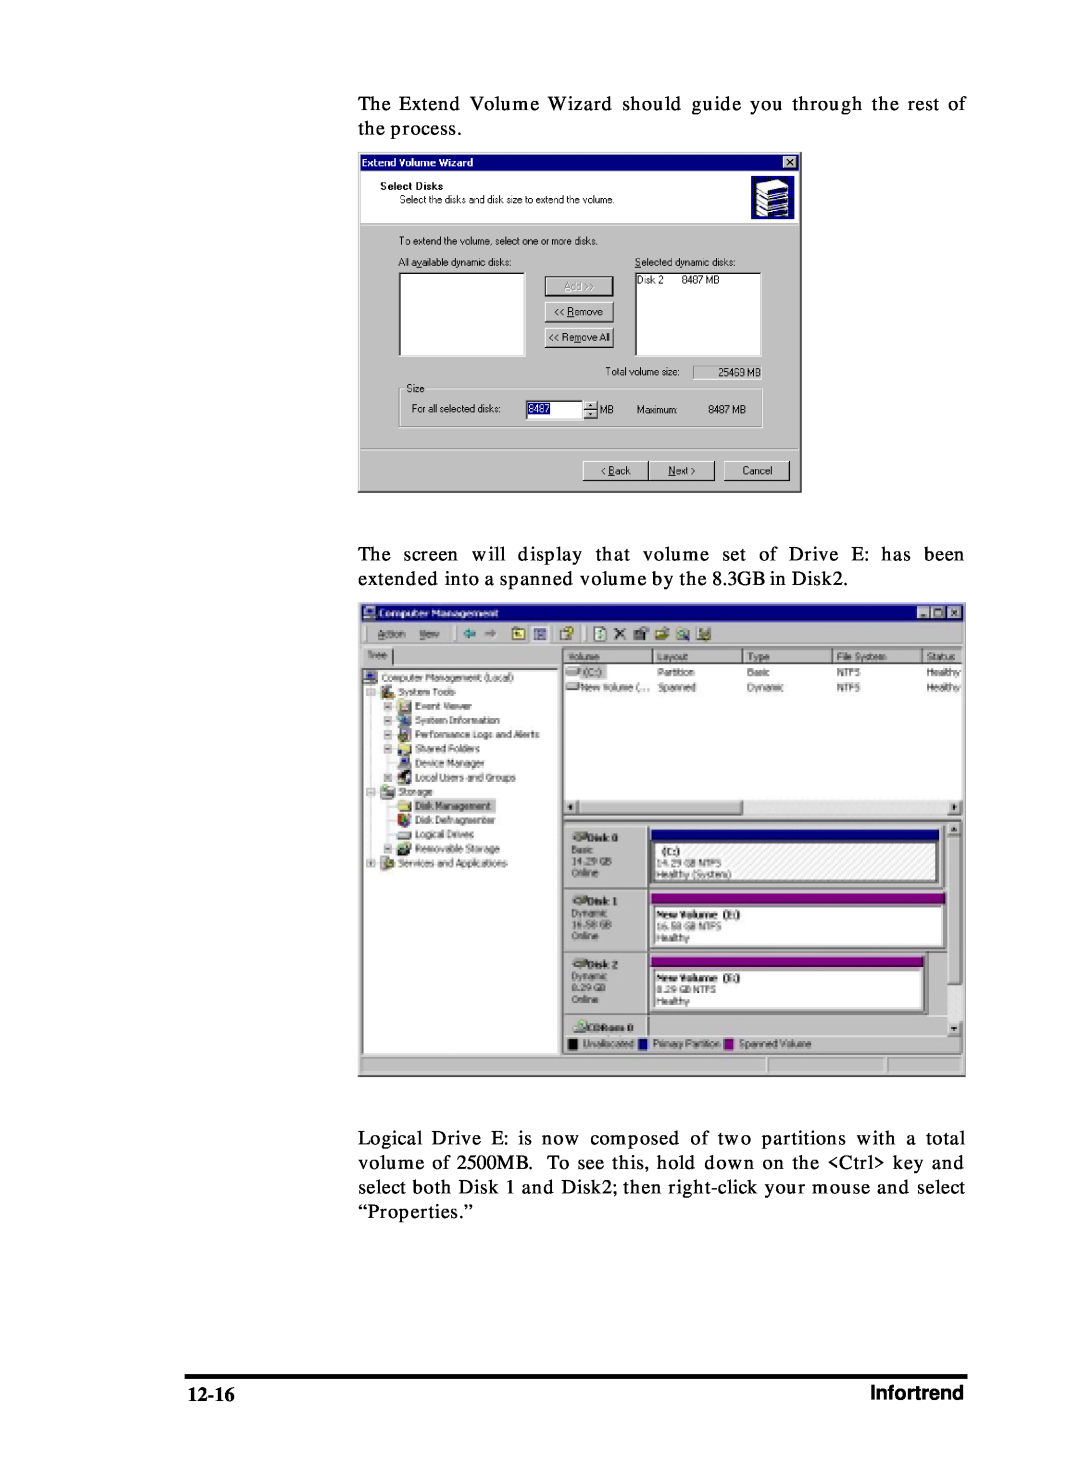 Compaq Infortrend manual The Extend Volume Wizard should guide you through the rest of the process 